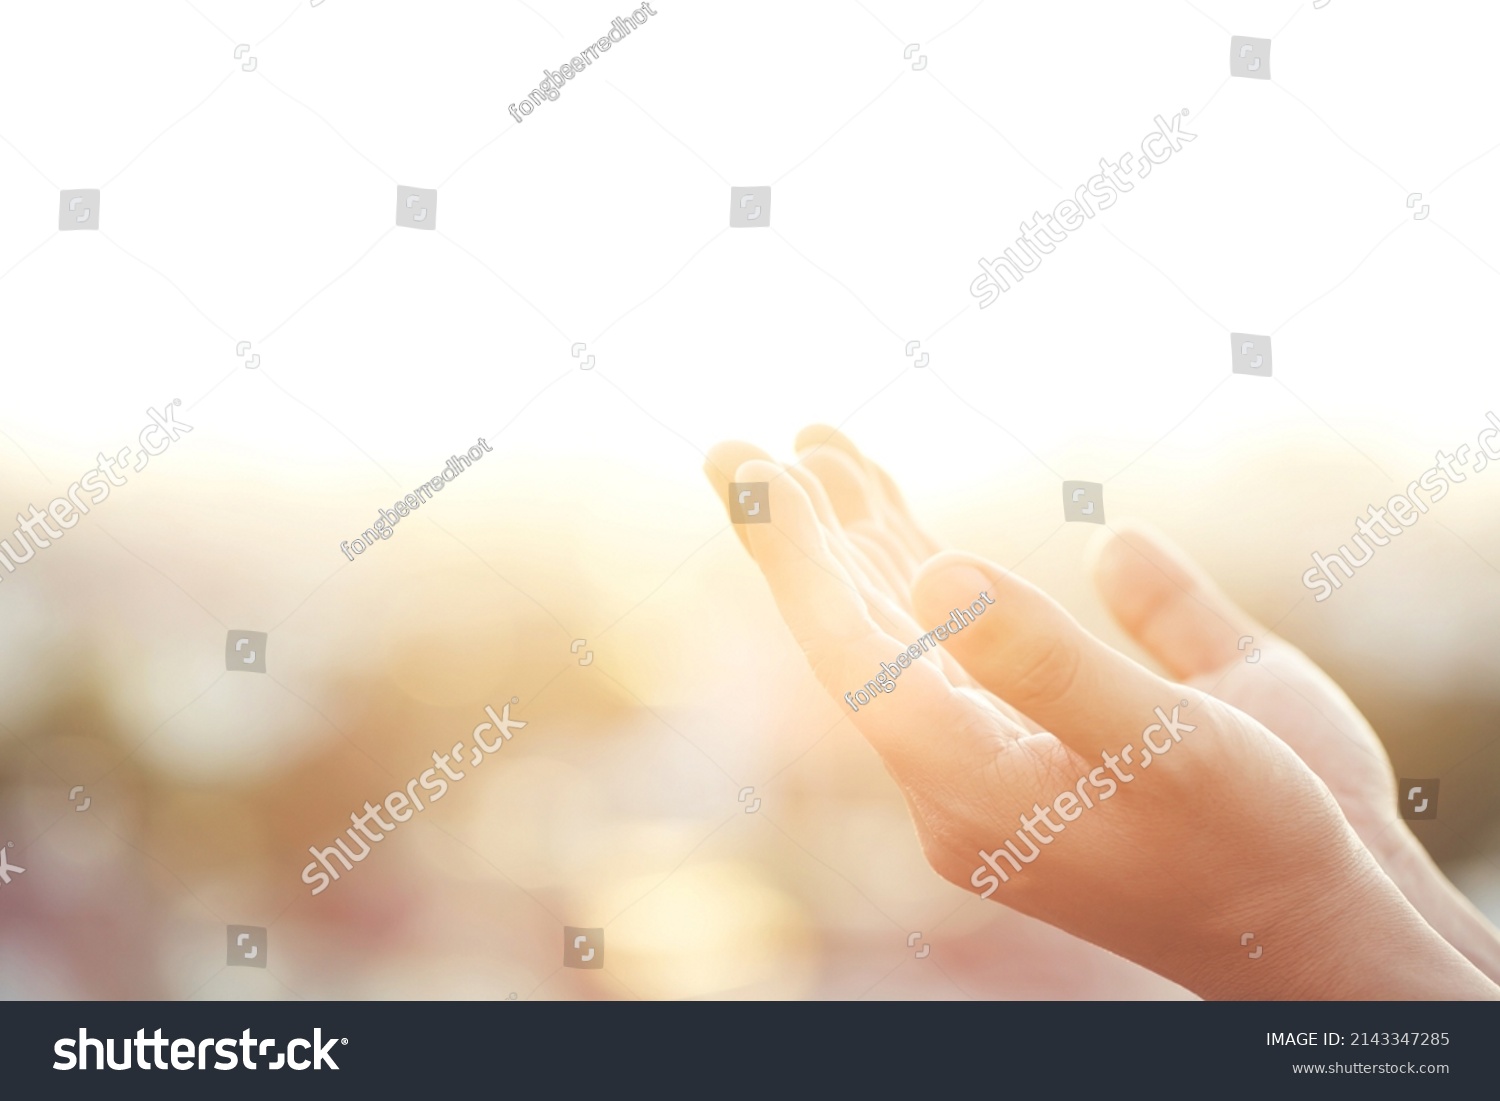 Human hands open palm up worship Praying with faith and belief in God of an appeal to the sky. Concept Religion and spirituality with believe Power of hope or love and devotion. filler tone vintage. #2143347285